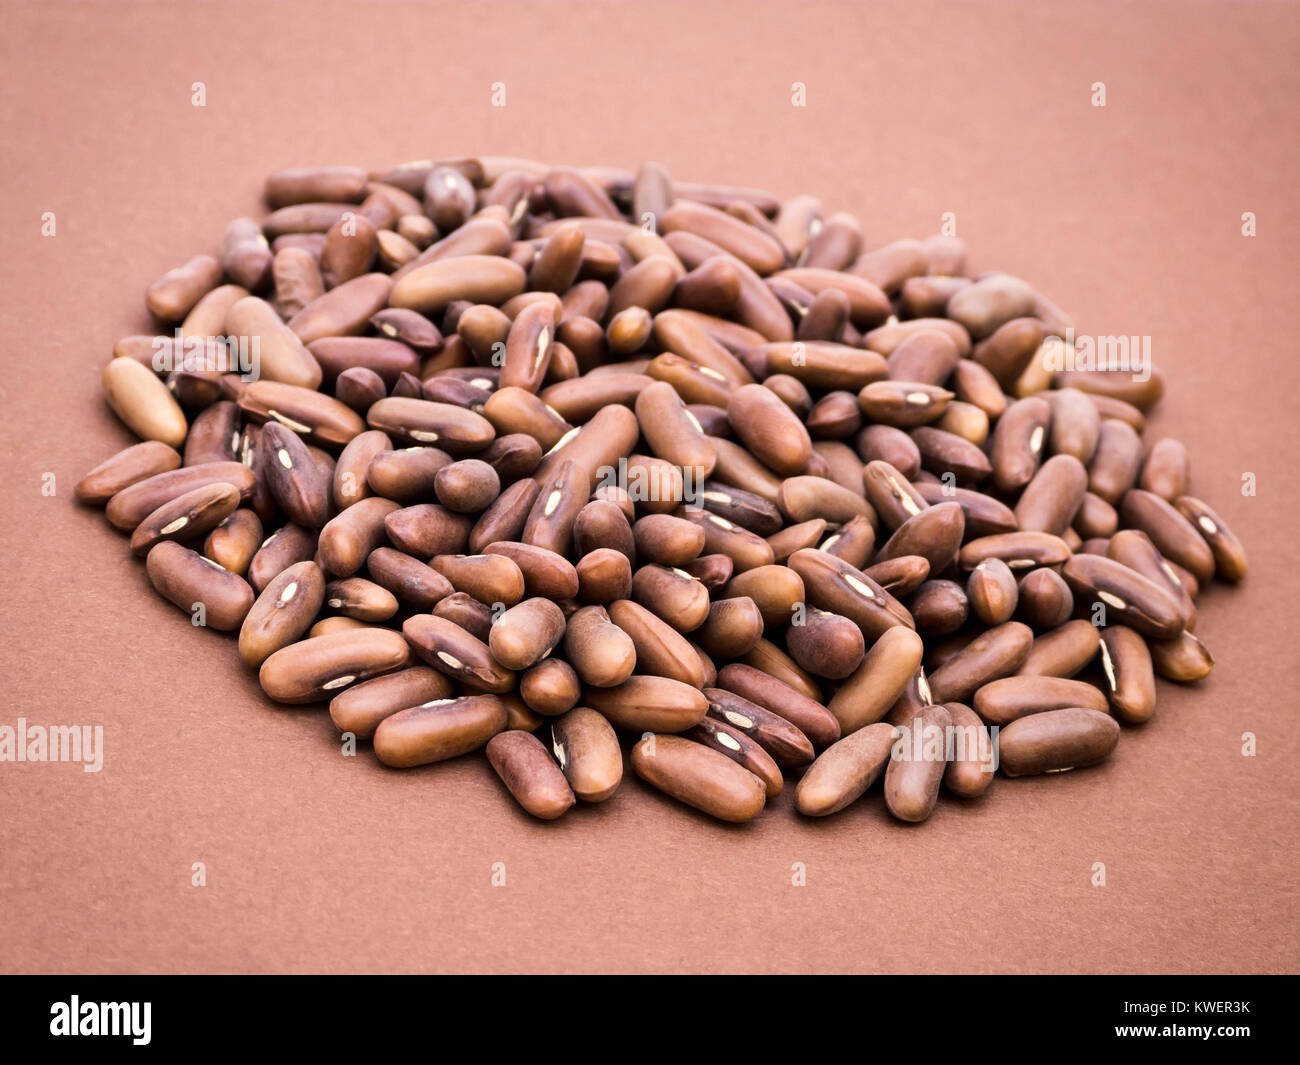 Raw kidney beans on brown background, dutch angle view Stock Photo